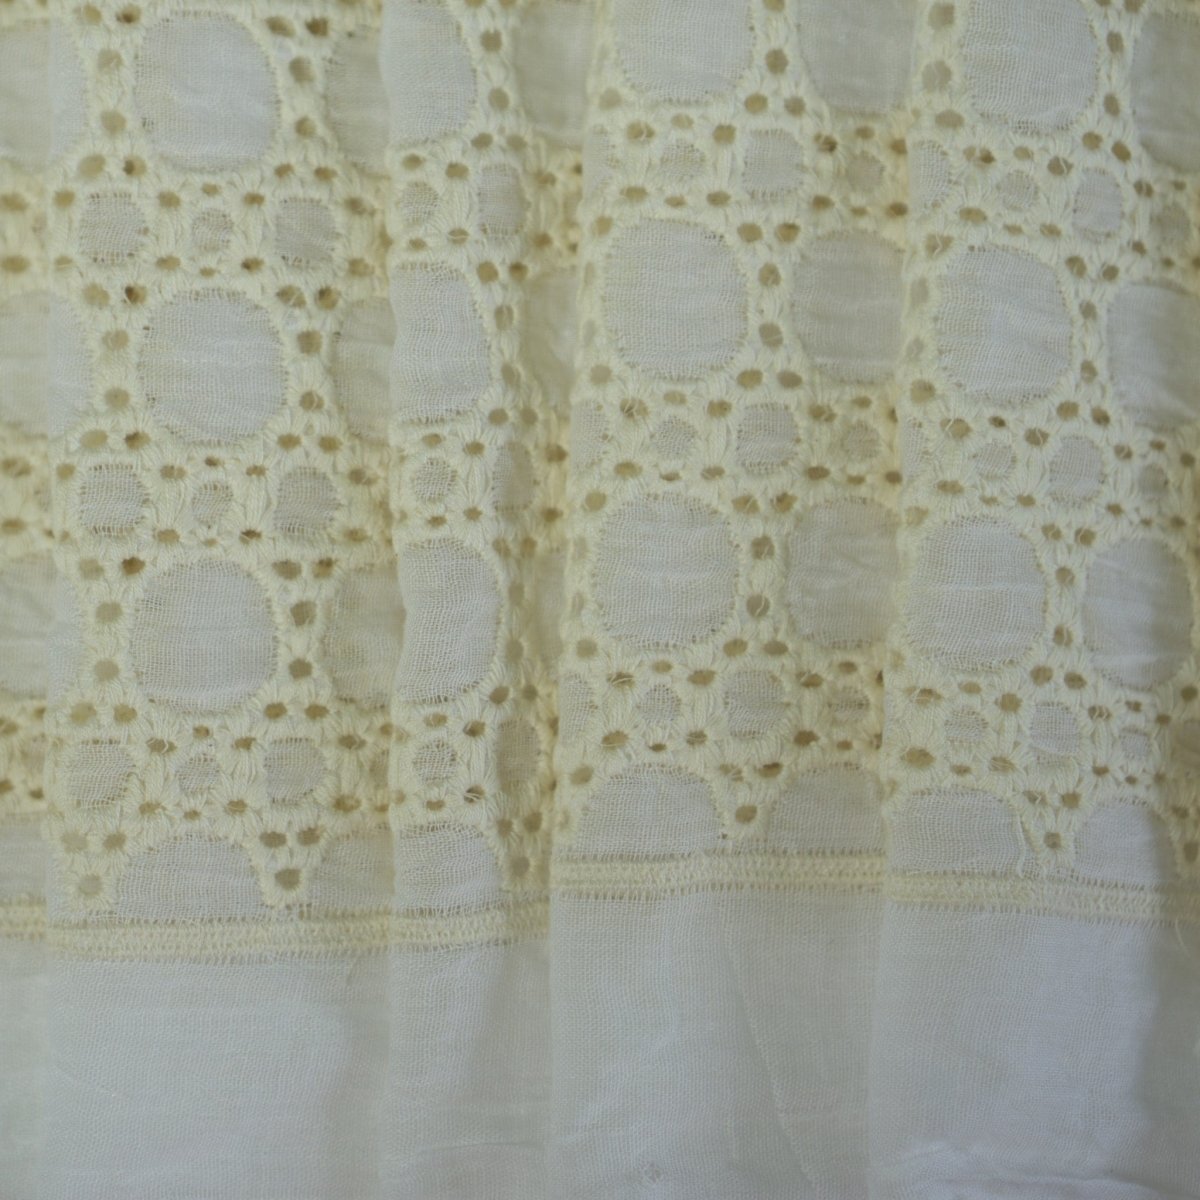 REMNANT - Embroidered Cotton - Cream Circles - 68% Cotton 32% Polyester - 50cm